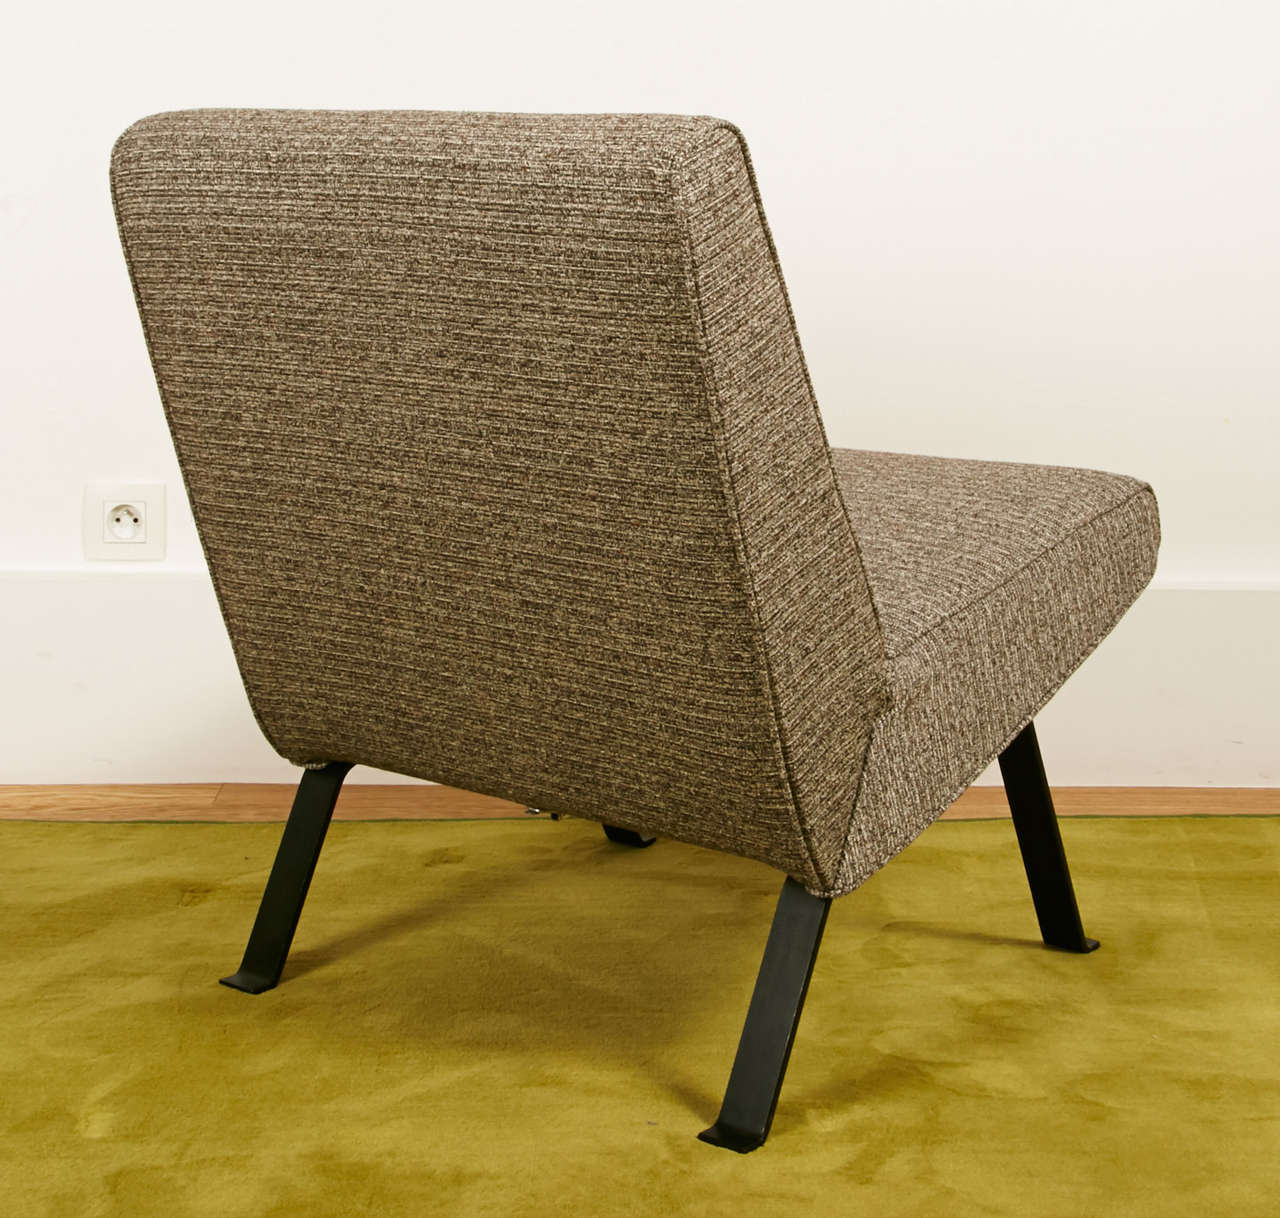 Fabric Pair of chairs by Joseph-André Motte - Steiner Edition - 1957